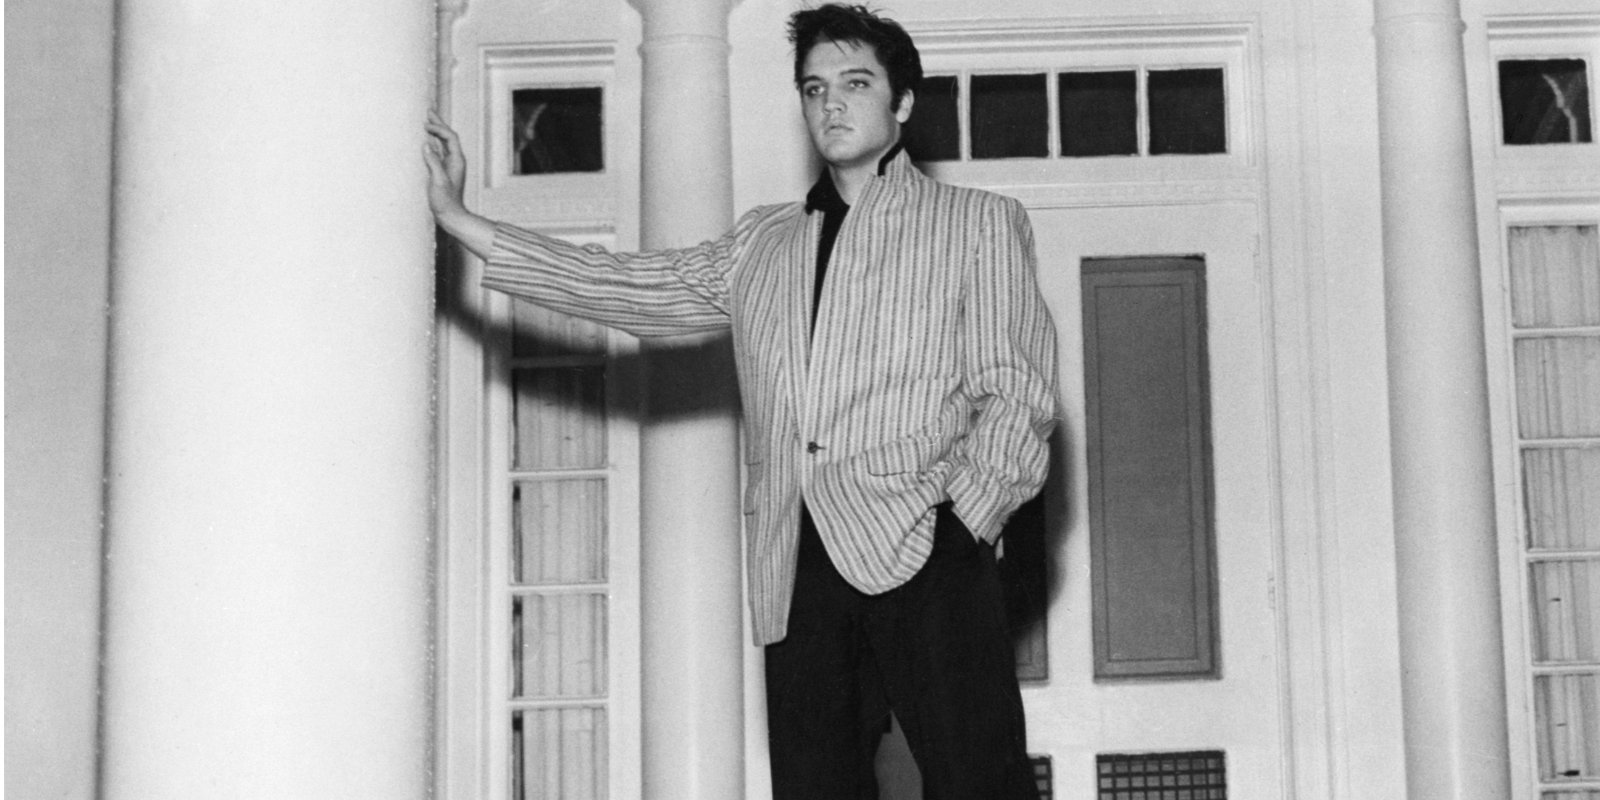 Elvis Presley poses outside of his Graceland home in Memphis, Tennessee.